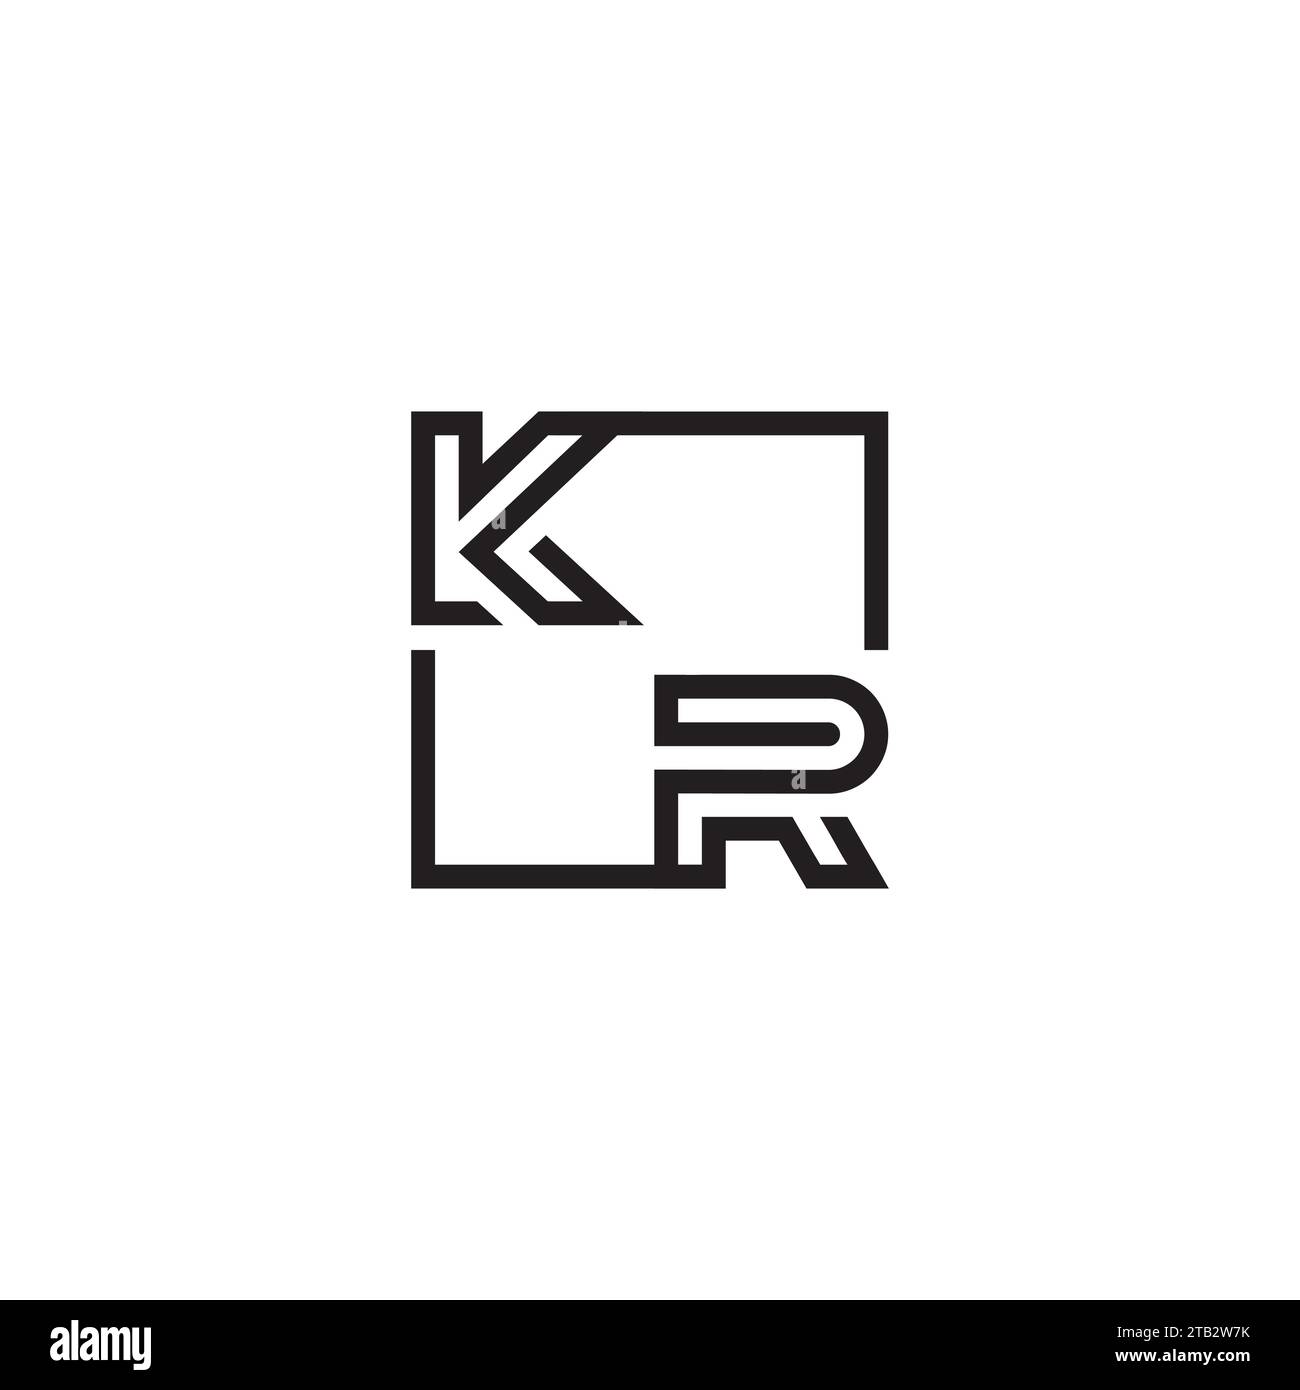 KR initial logo letters in high quality professional design that will print well across any print media Stock Vector